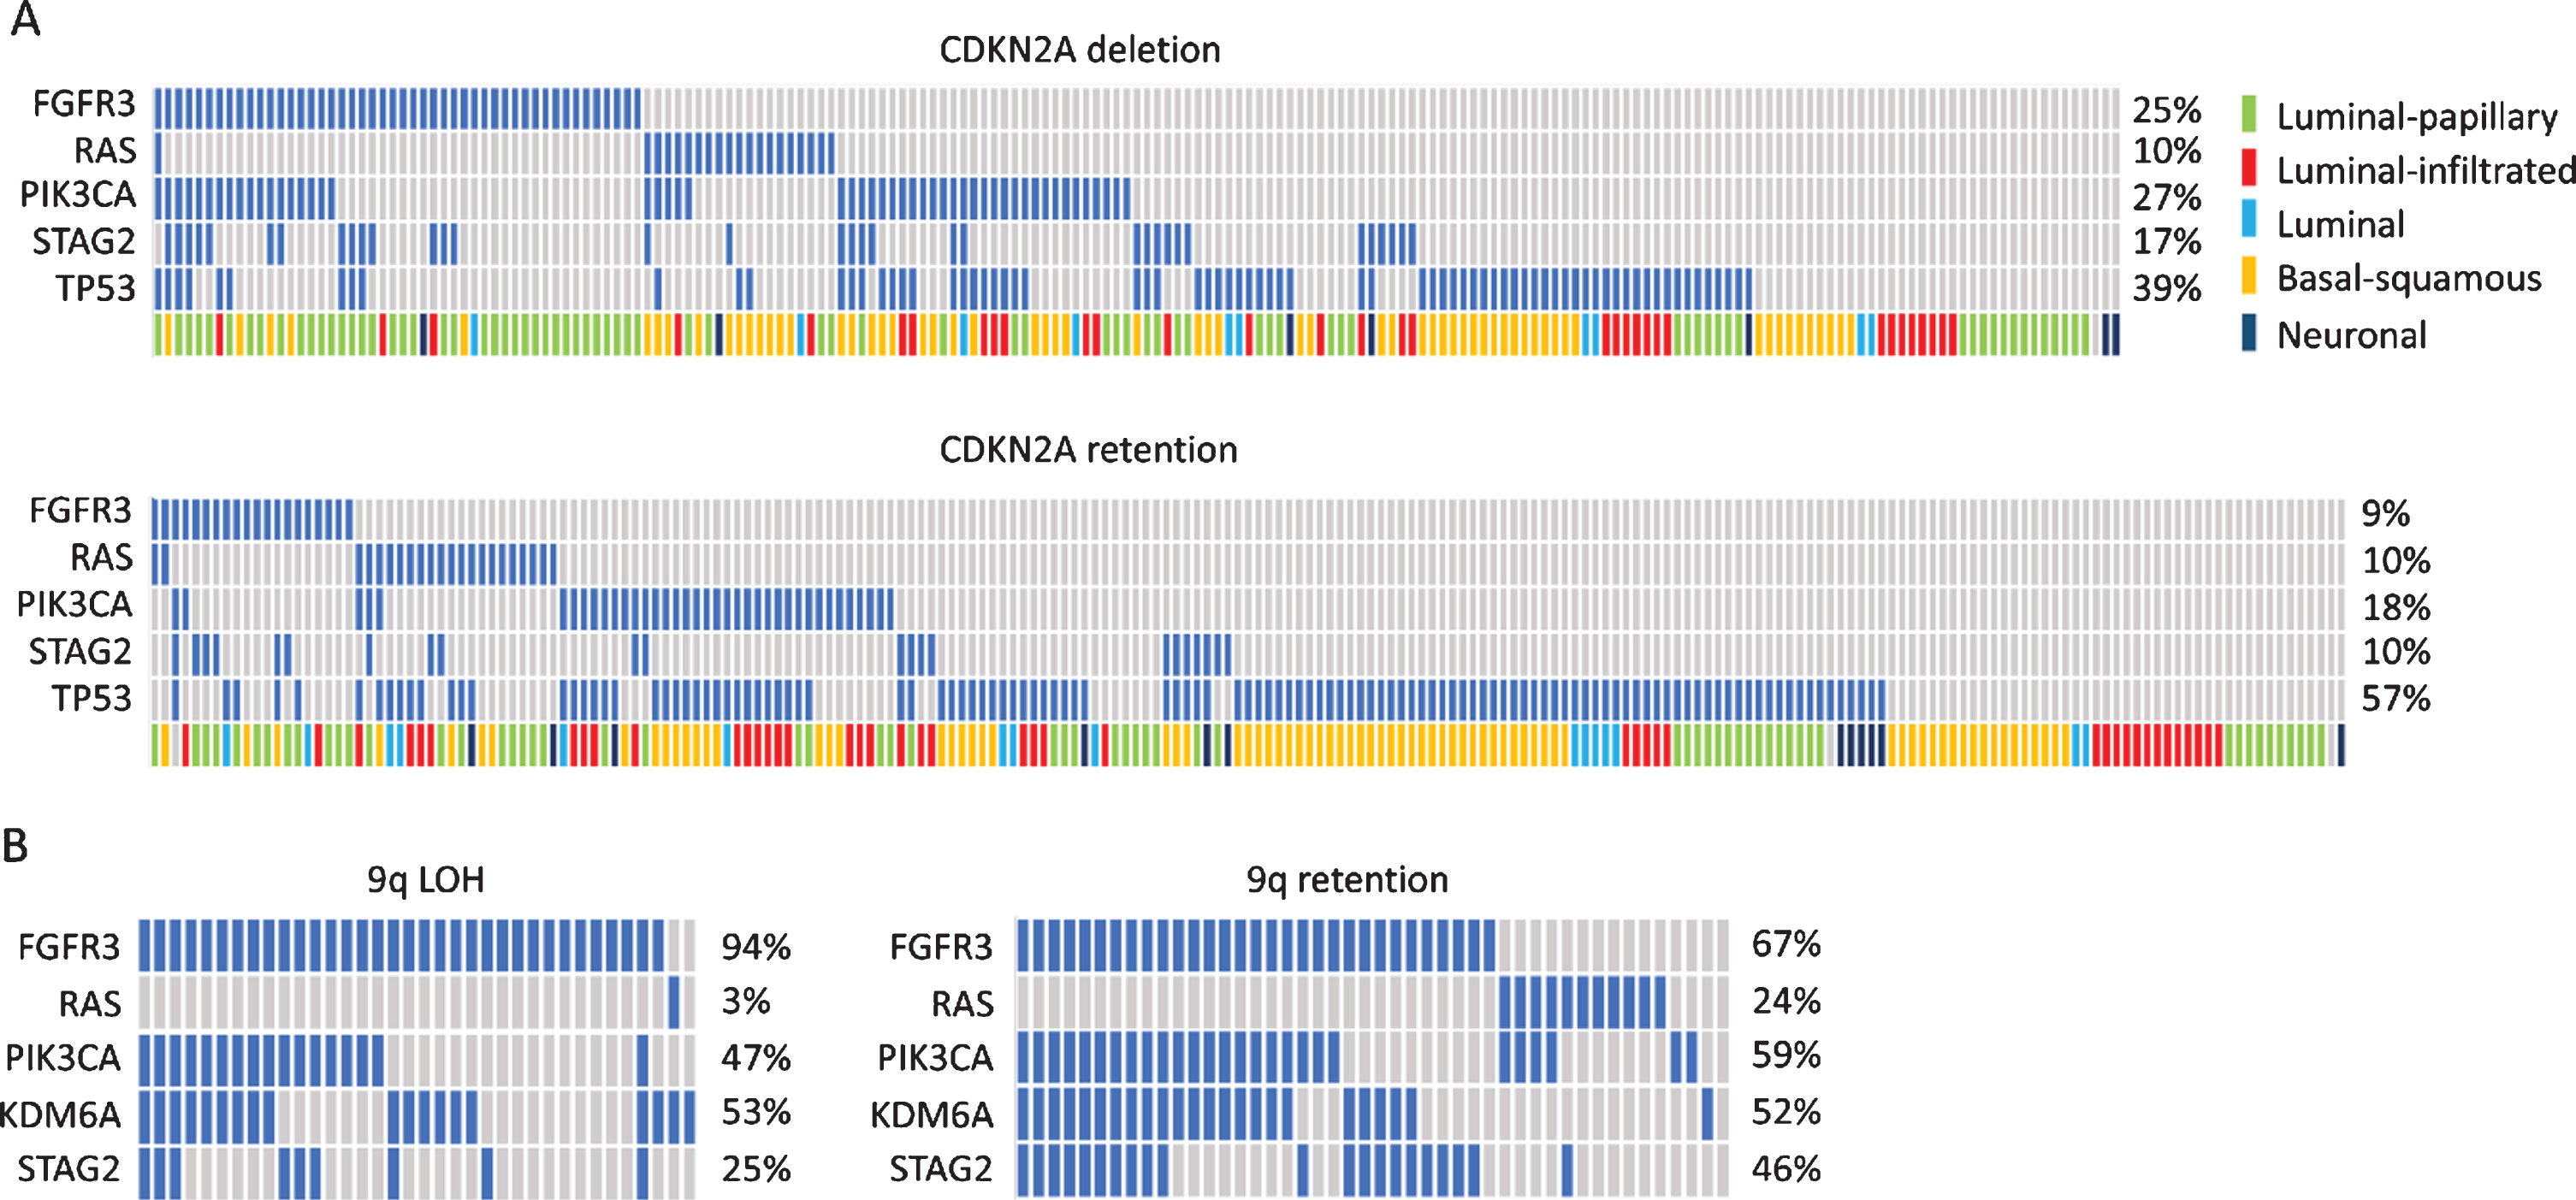 Oncoplots showing distribution of common mutations according to chromosome 9 status. A. Oncoplot for selected genes in muscle-invasive bladder tumours with and without deletion of the CDKN2A locus. Data from [30]. B. Oncoplot for selected genes in stage Ta tumors with and without 9q loss. Data from [165].